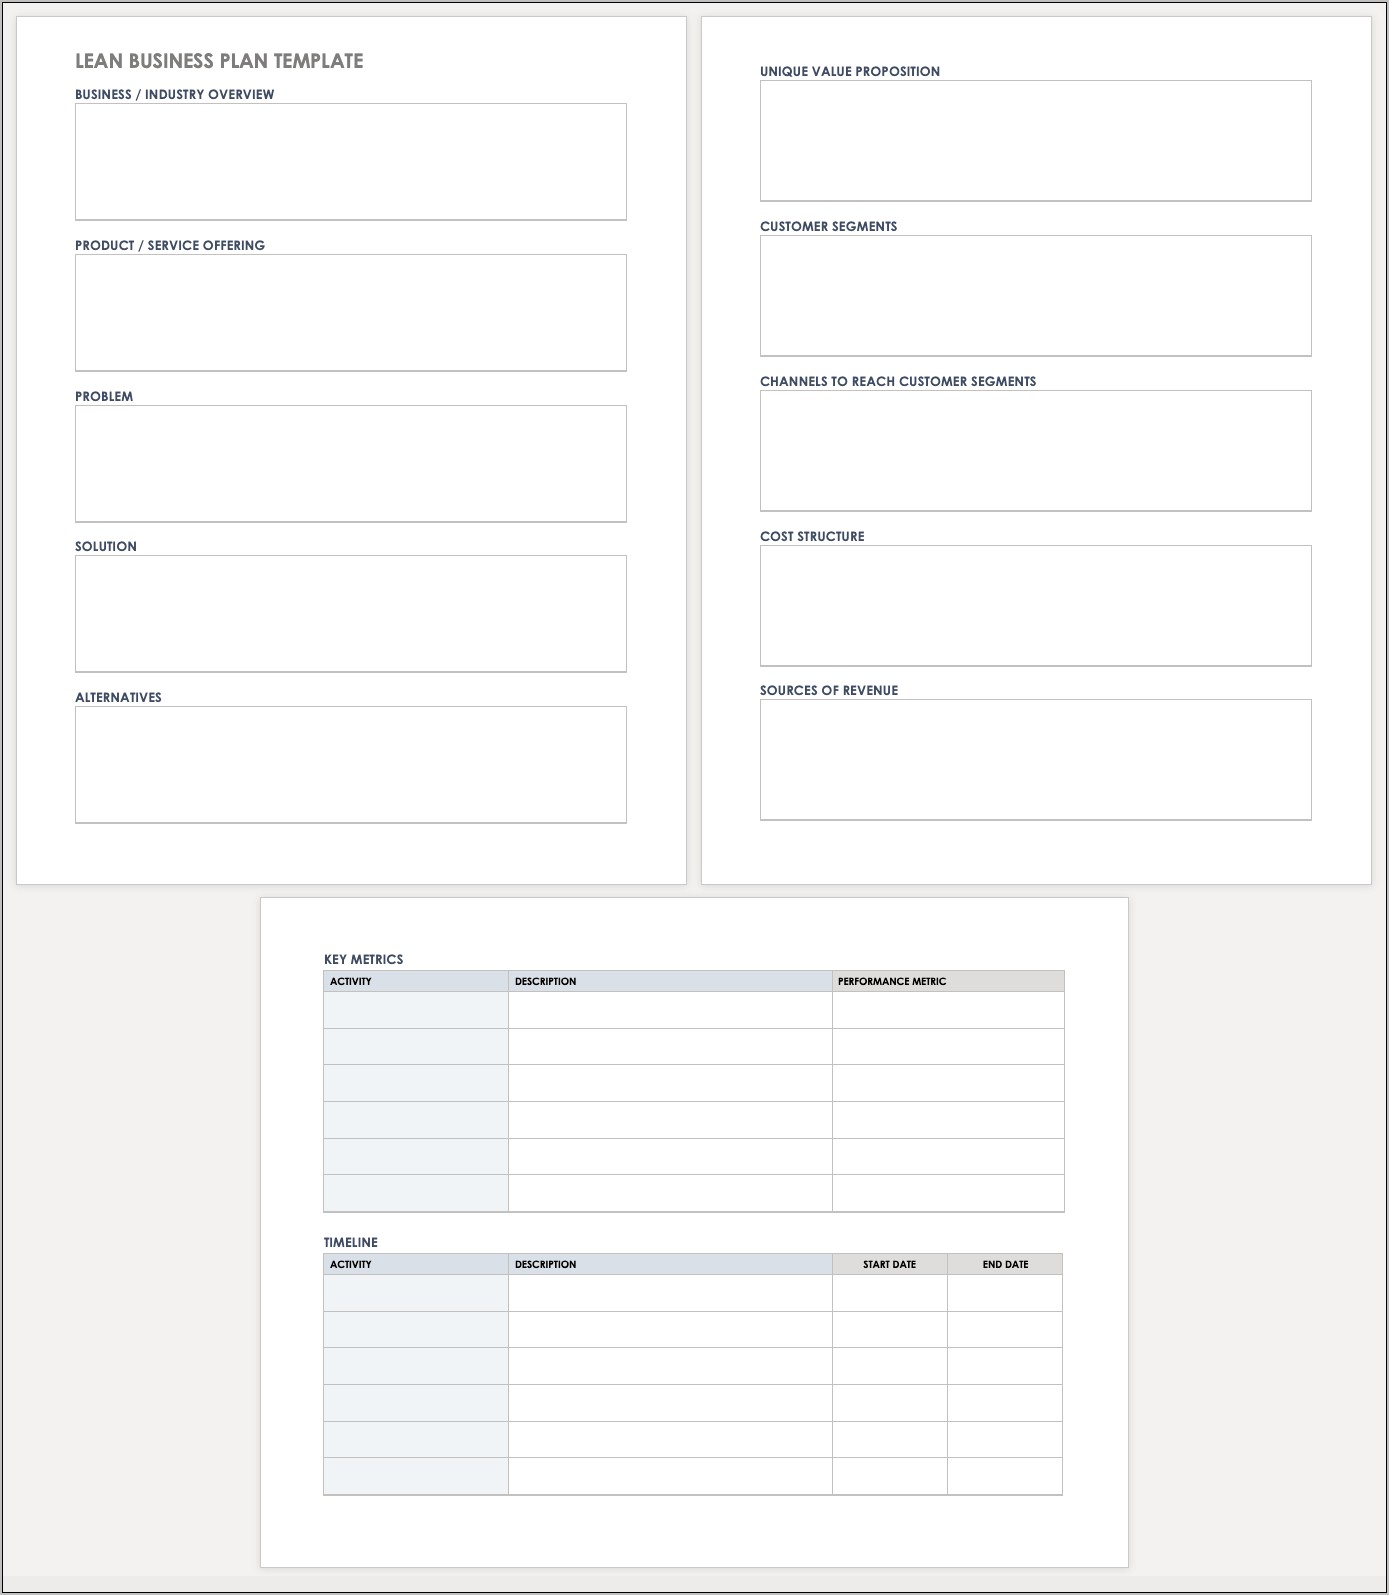 5 Year Business Plan Template Free